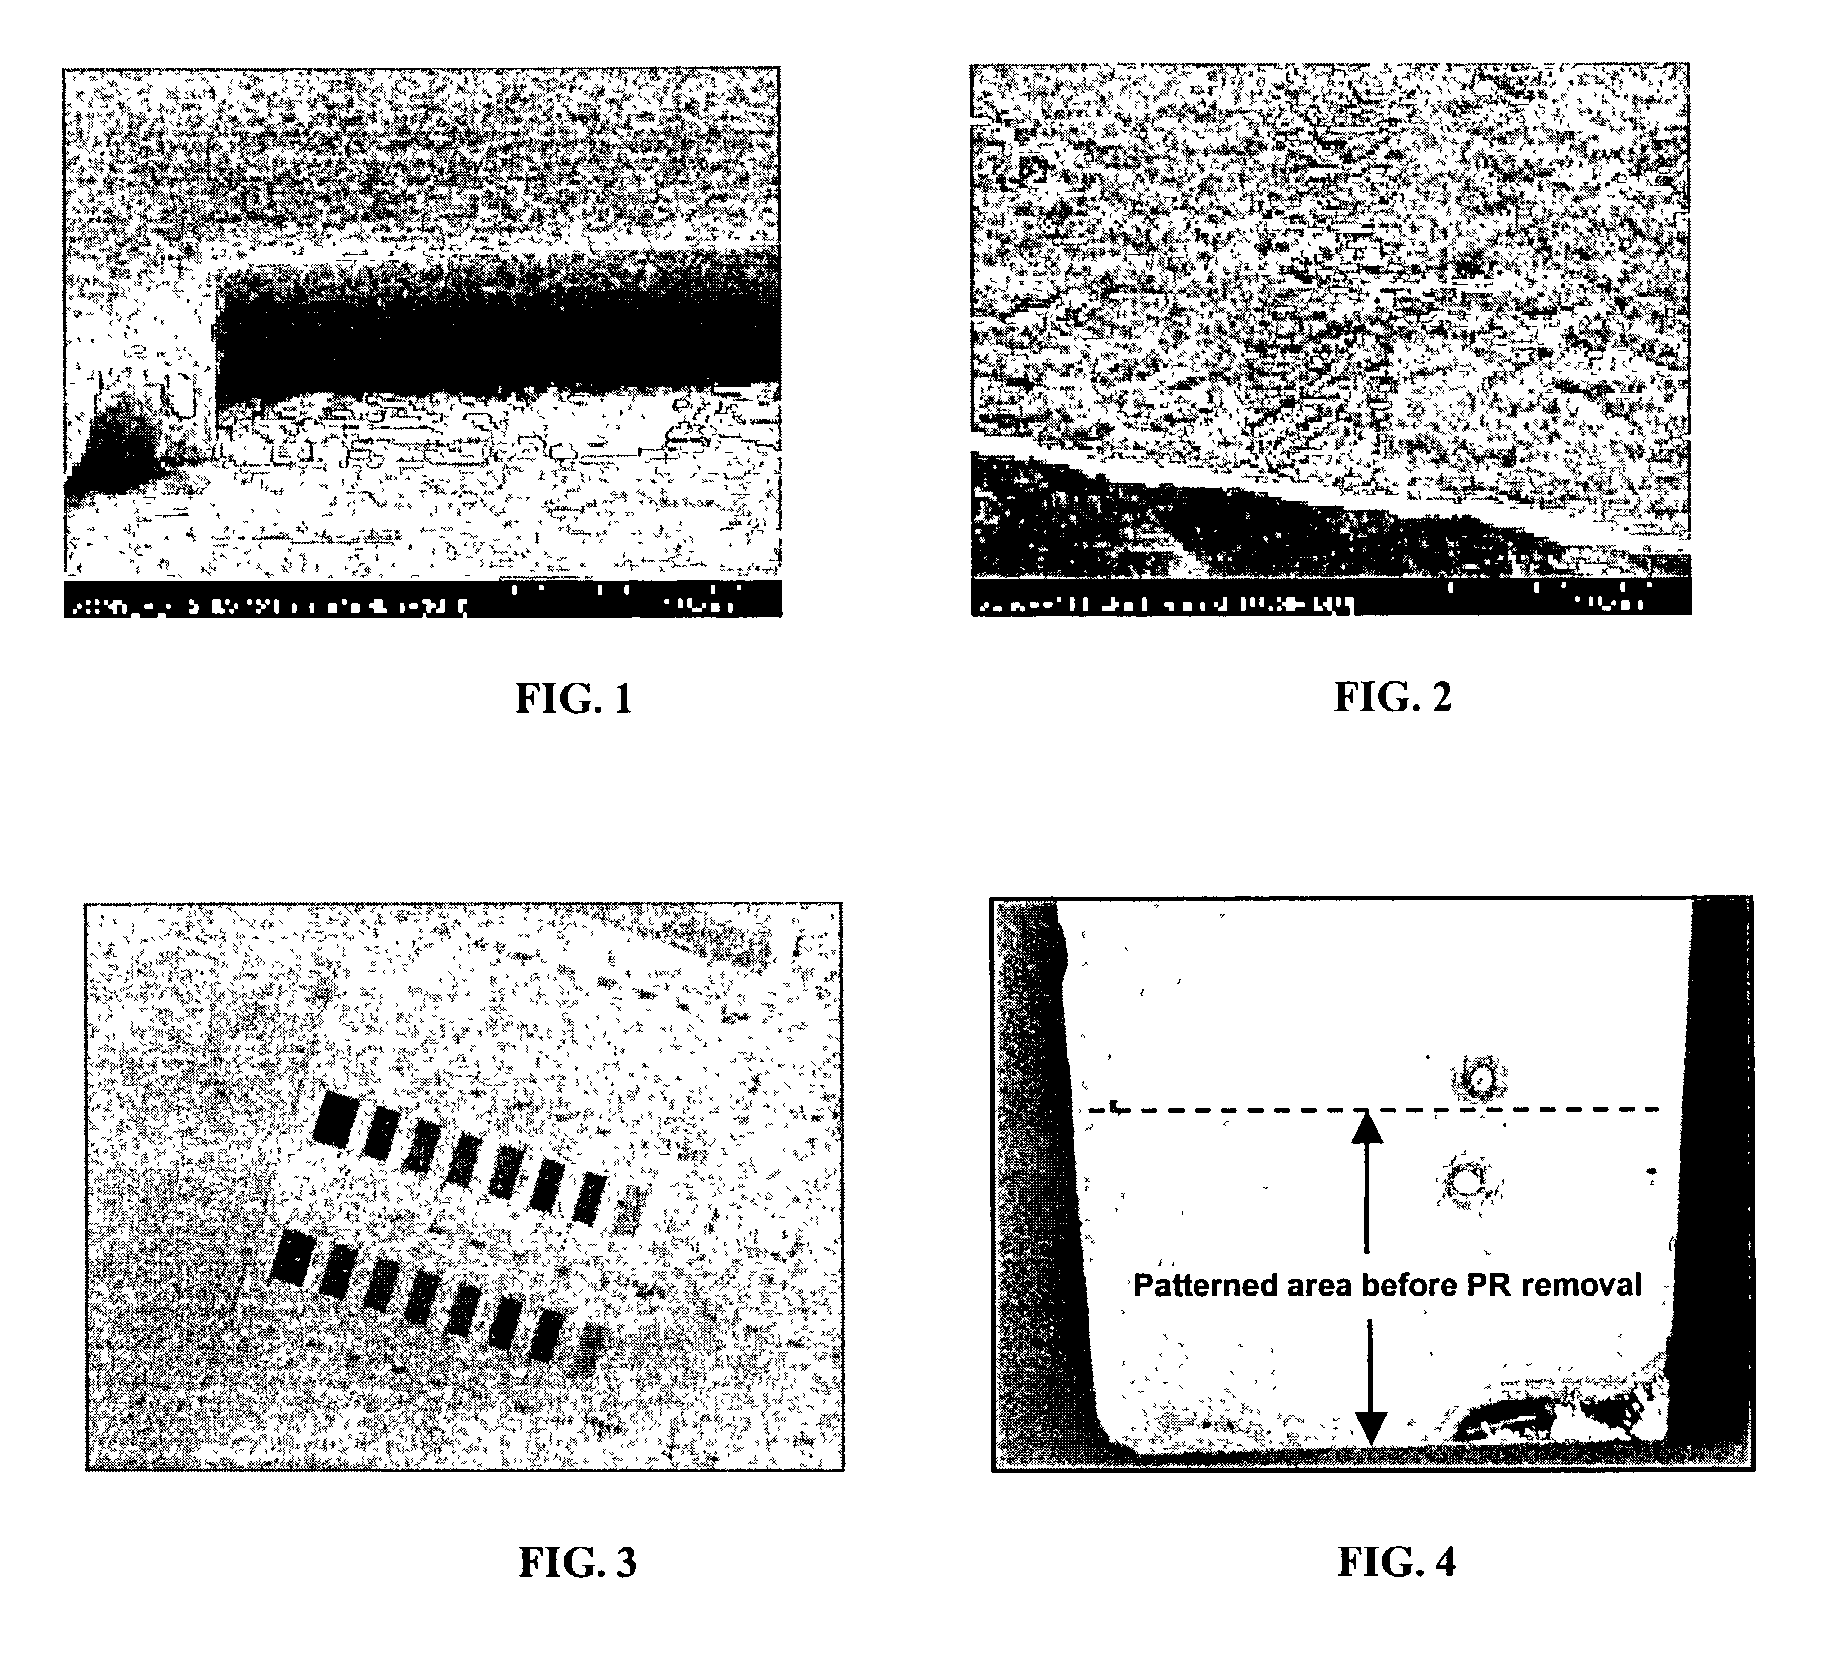 Supercritical carbon dioxide/chemical formulation for removal of photoresists